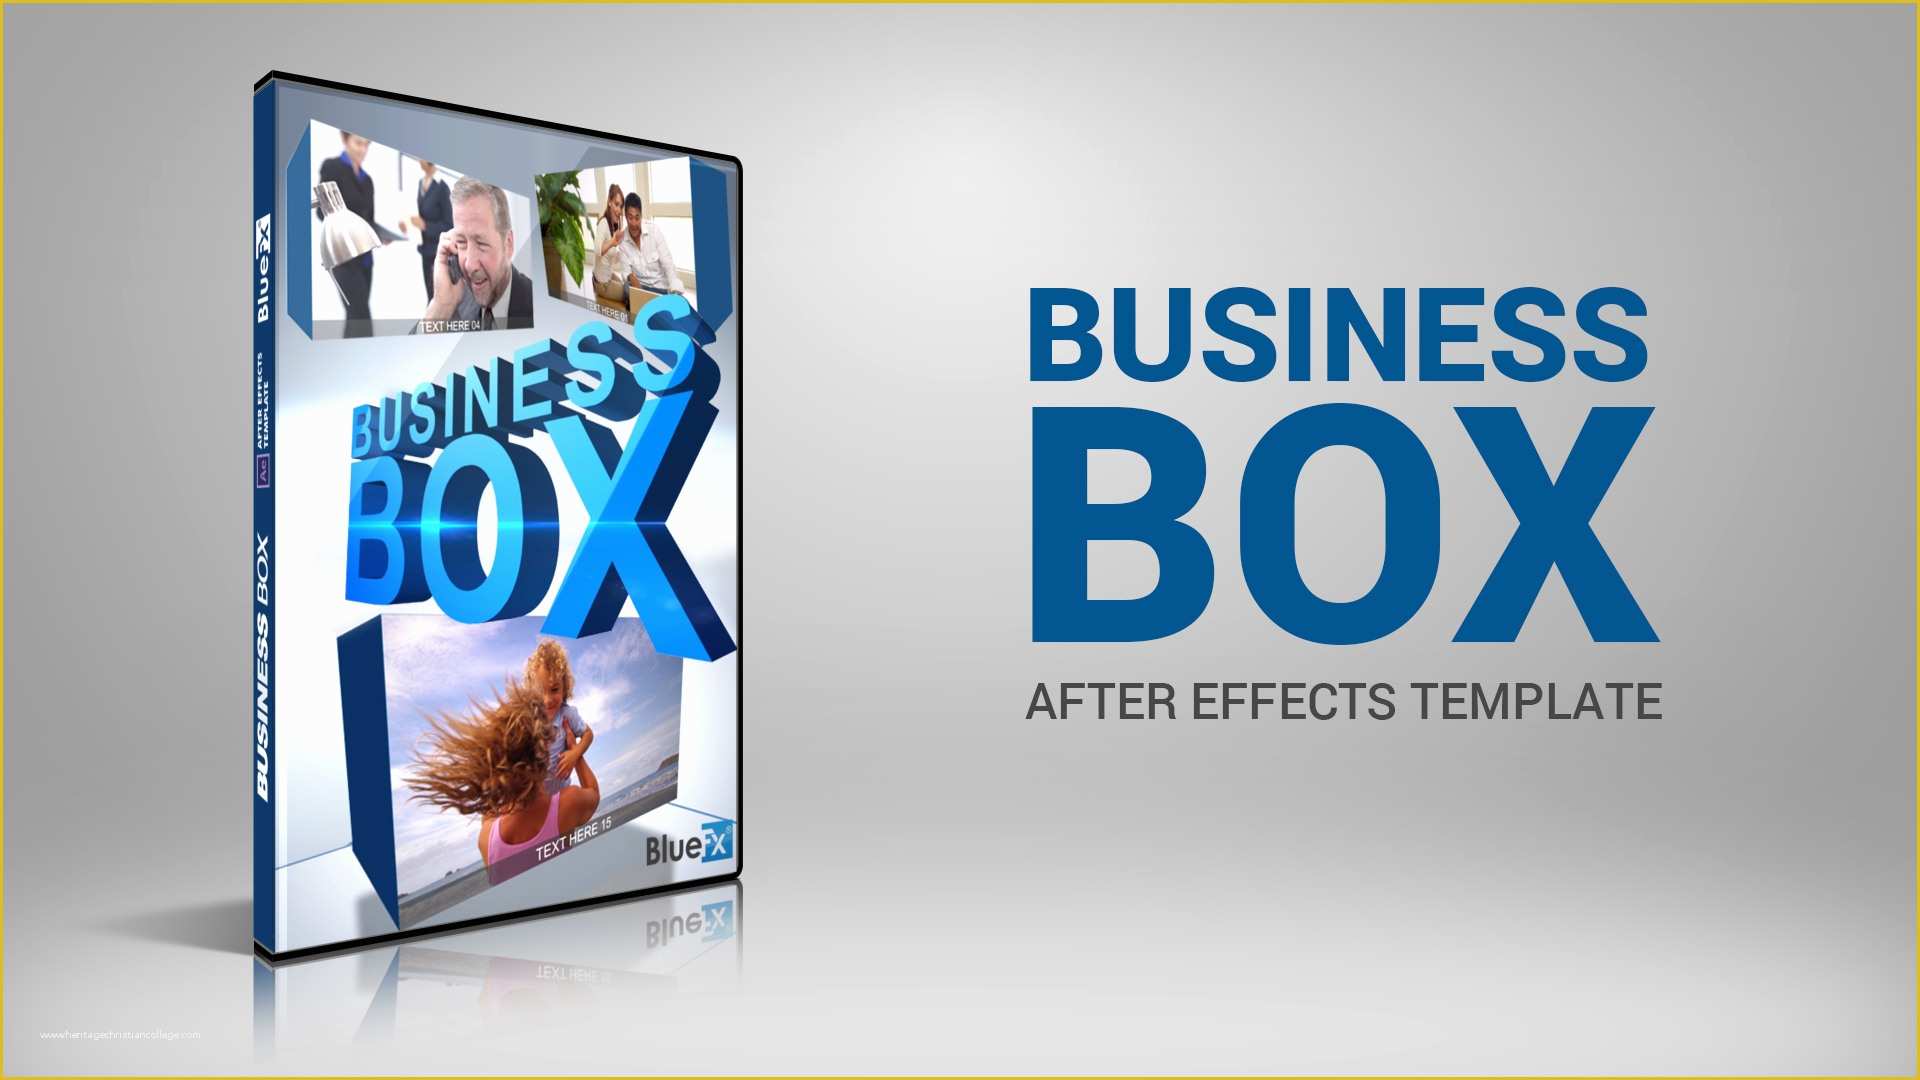 After Effects Holiday Templates Free Of Bluefx Business Box after Effects Template Bluefx